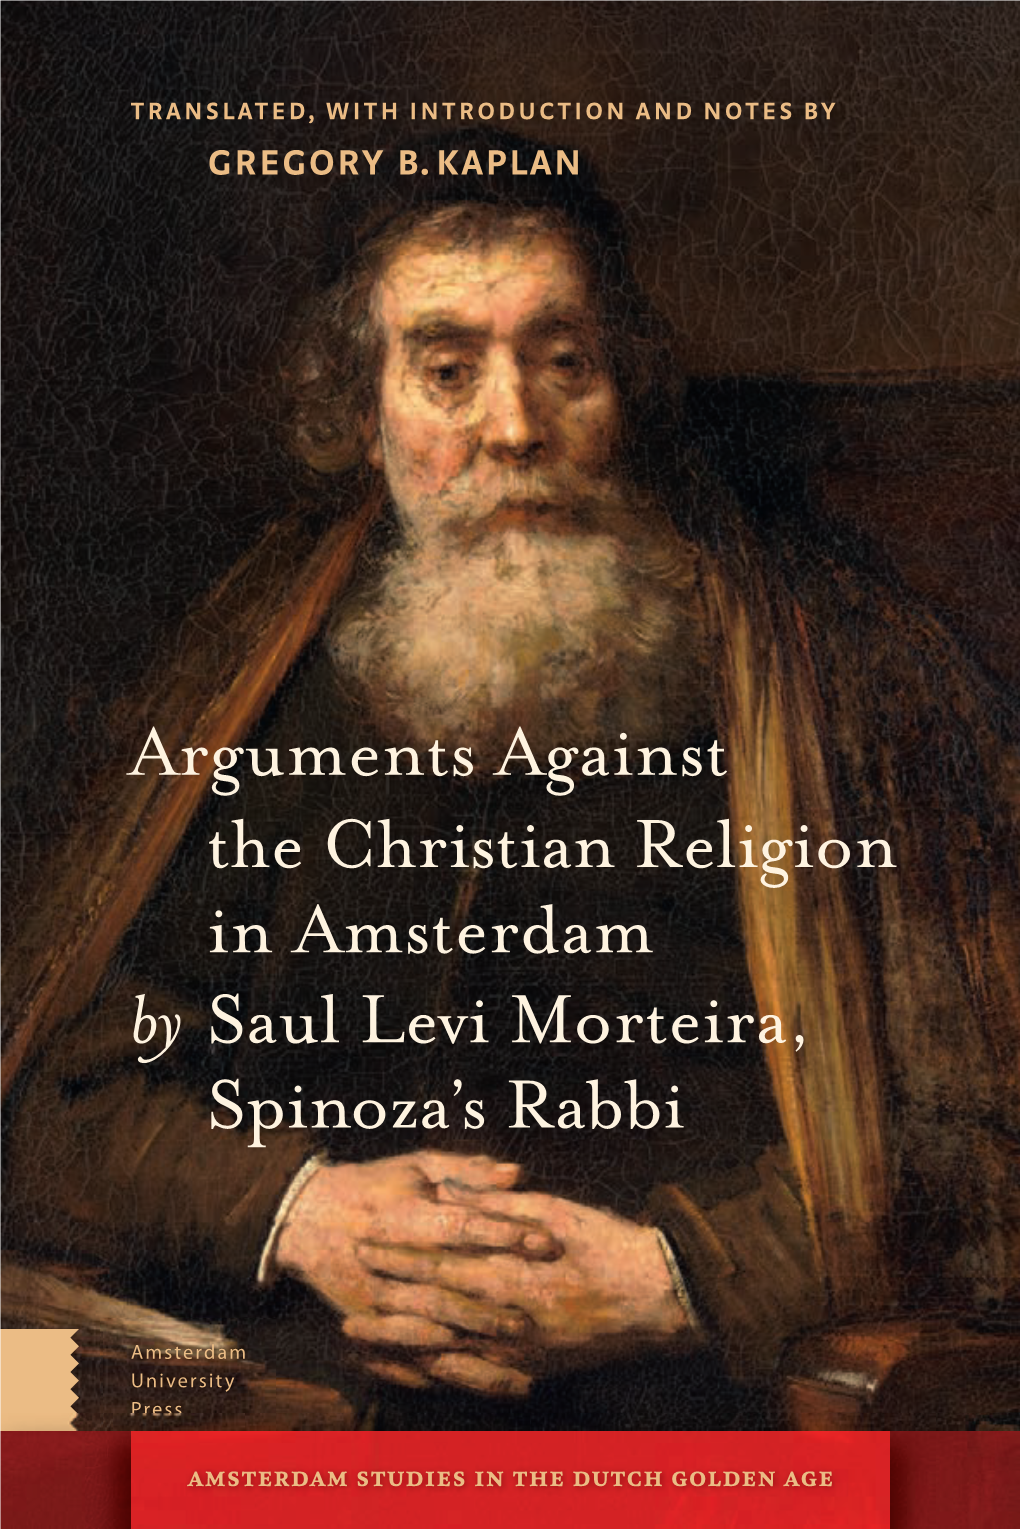 Arguments Against the Christian Religion in Amsterdam by Saul Levi Morteira, Spinoza’S Rabbi